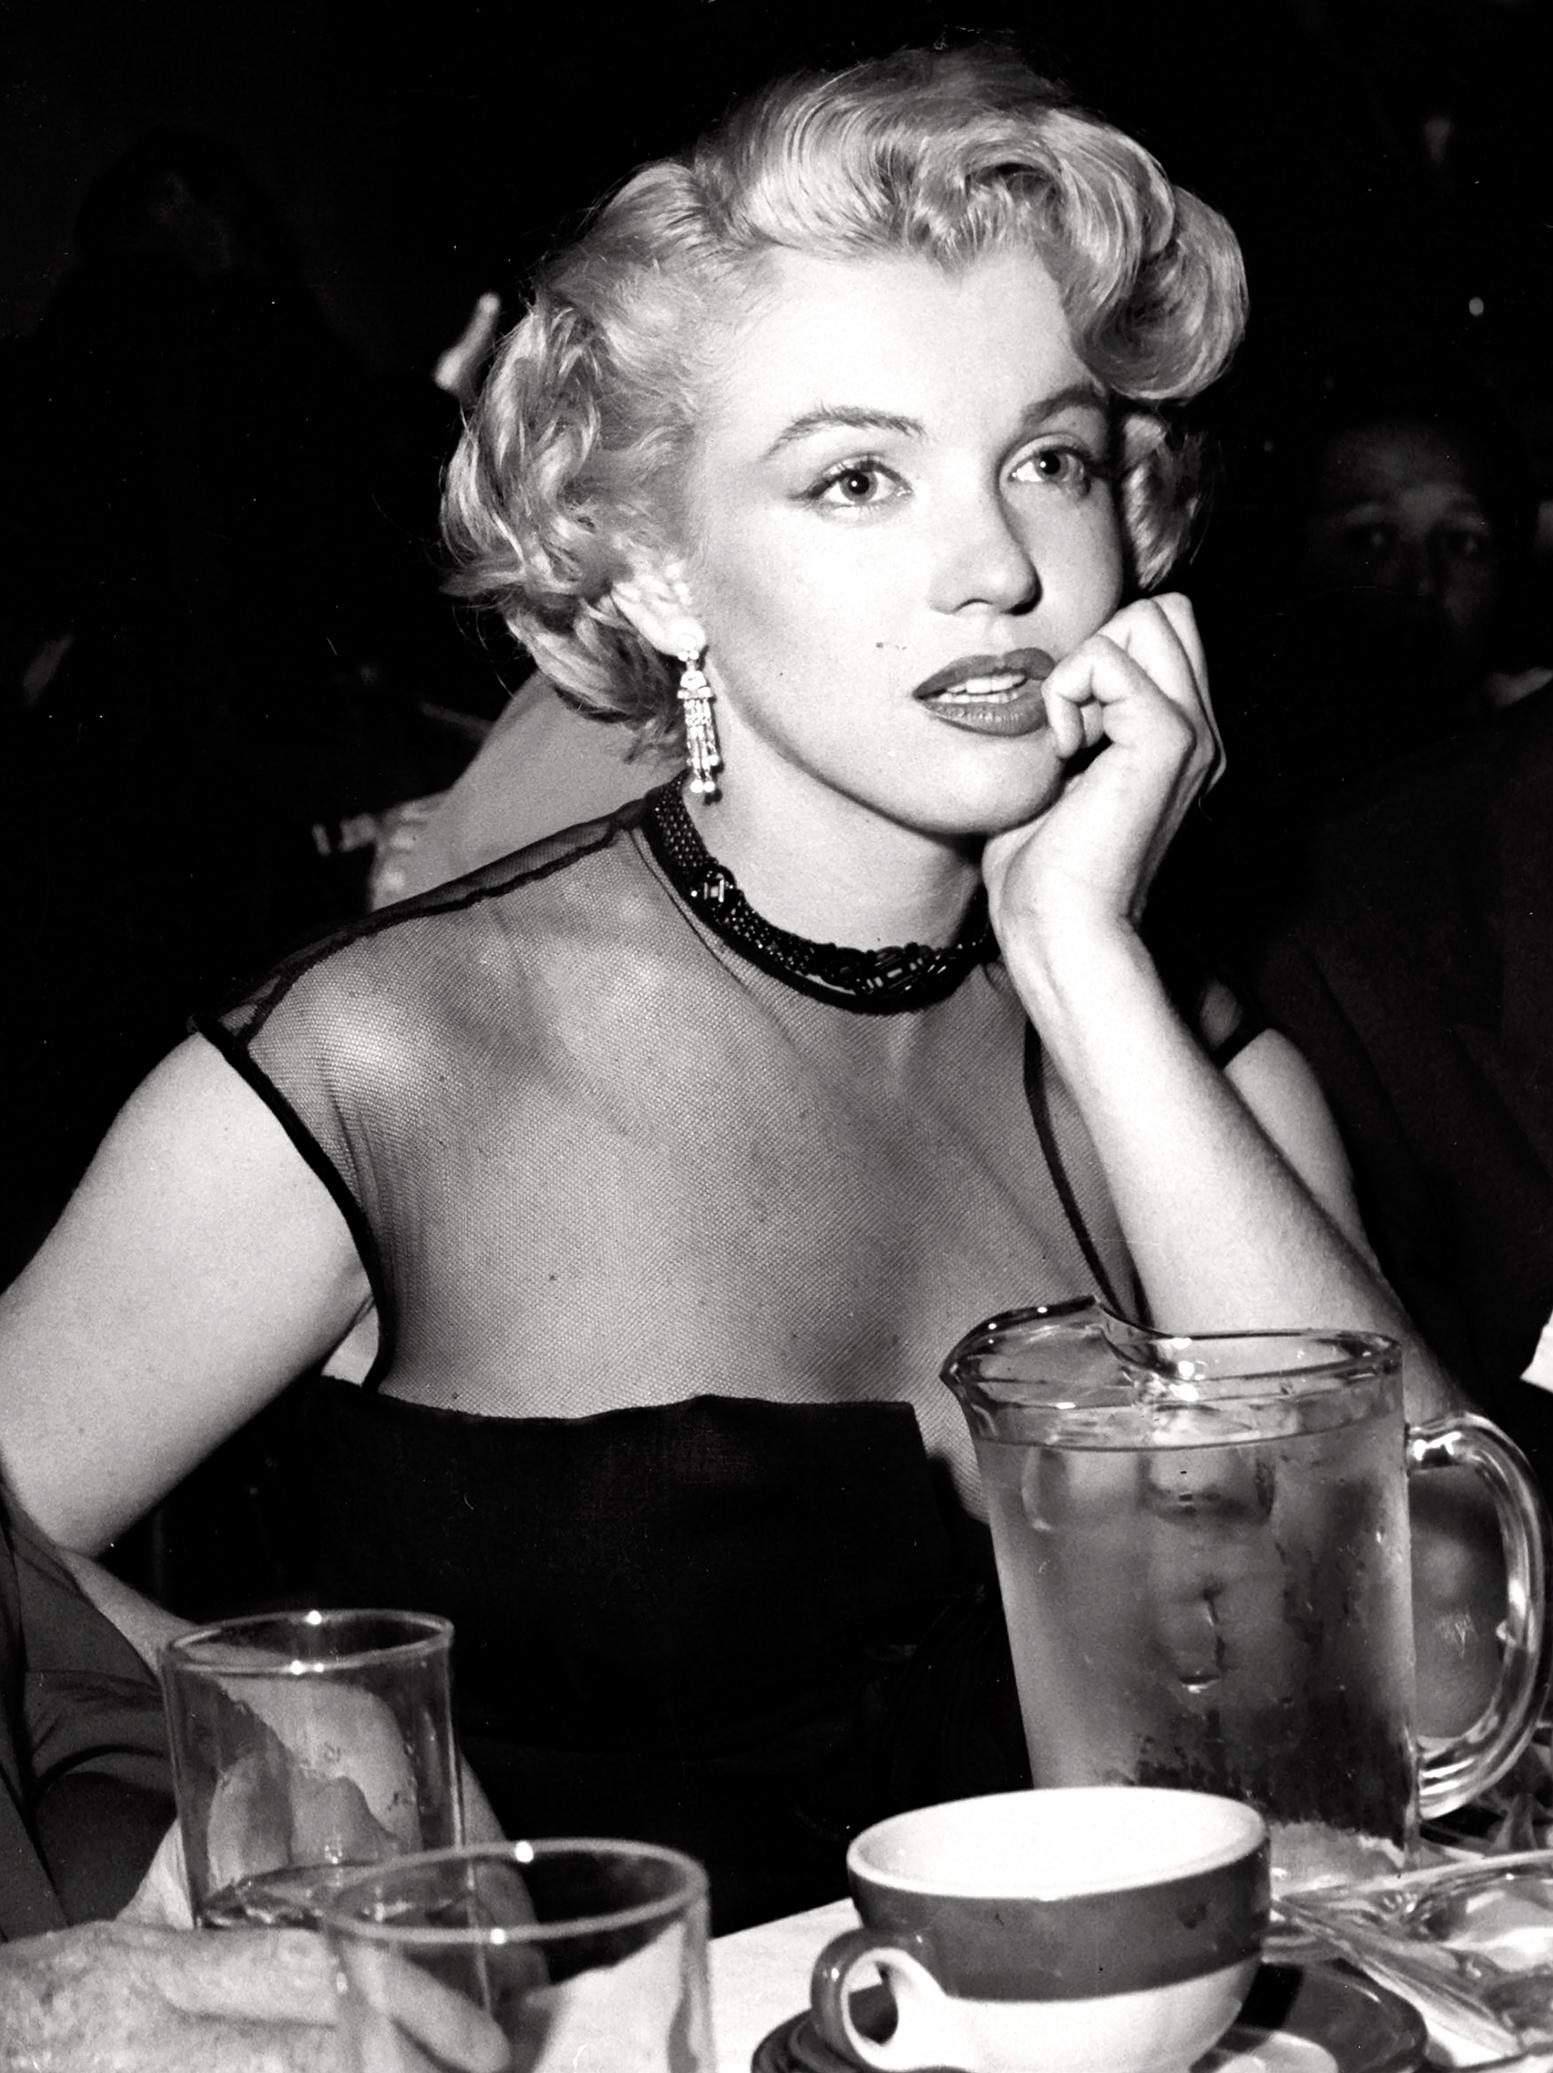 Unknown Black and White Photograph - Marilyn Monroe at a Dinner Event